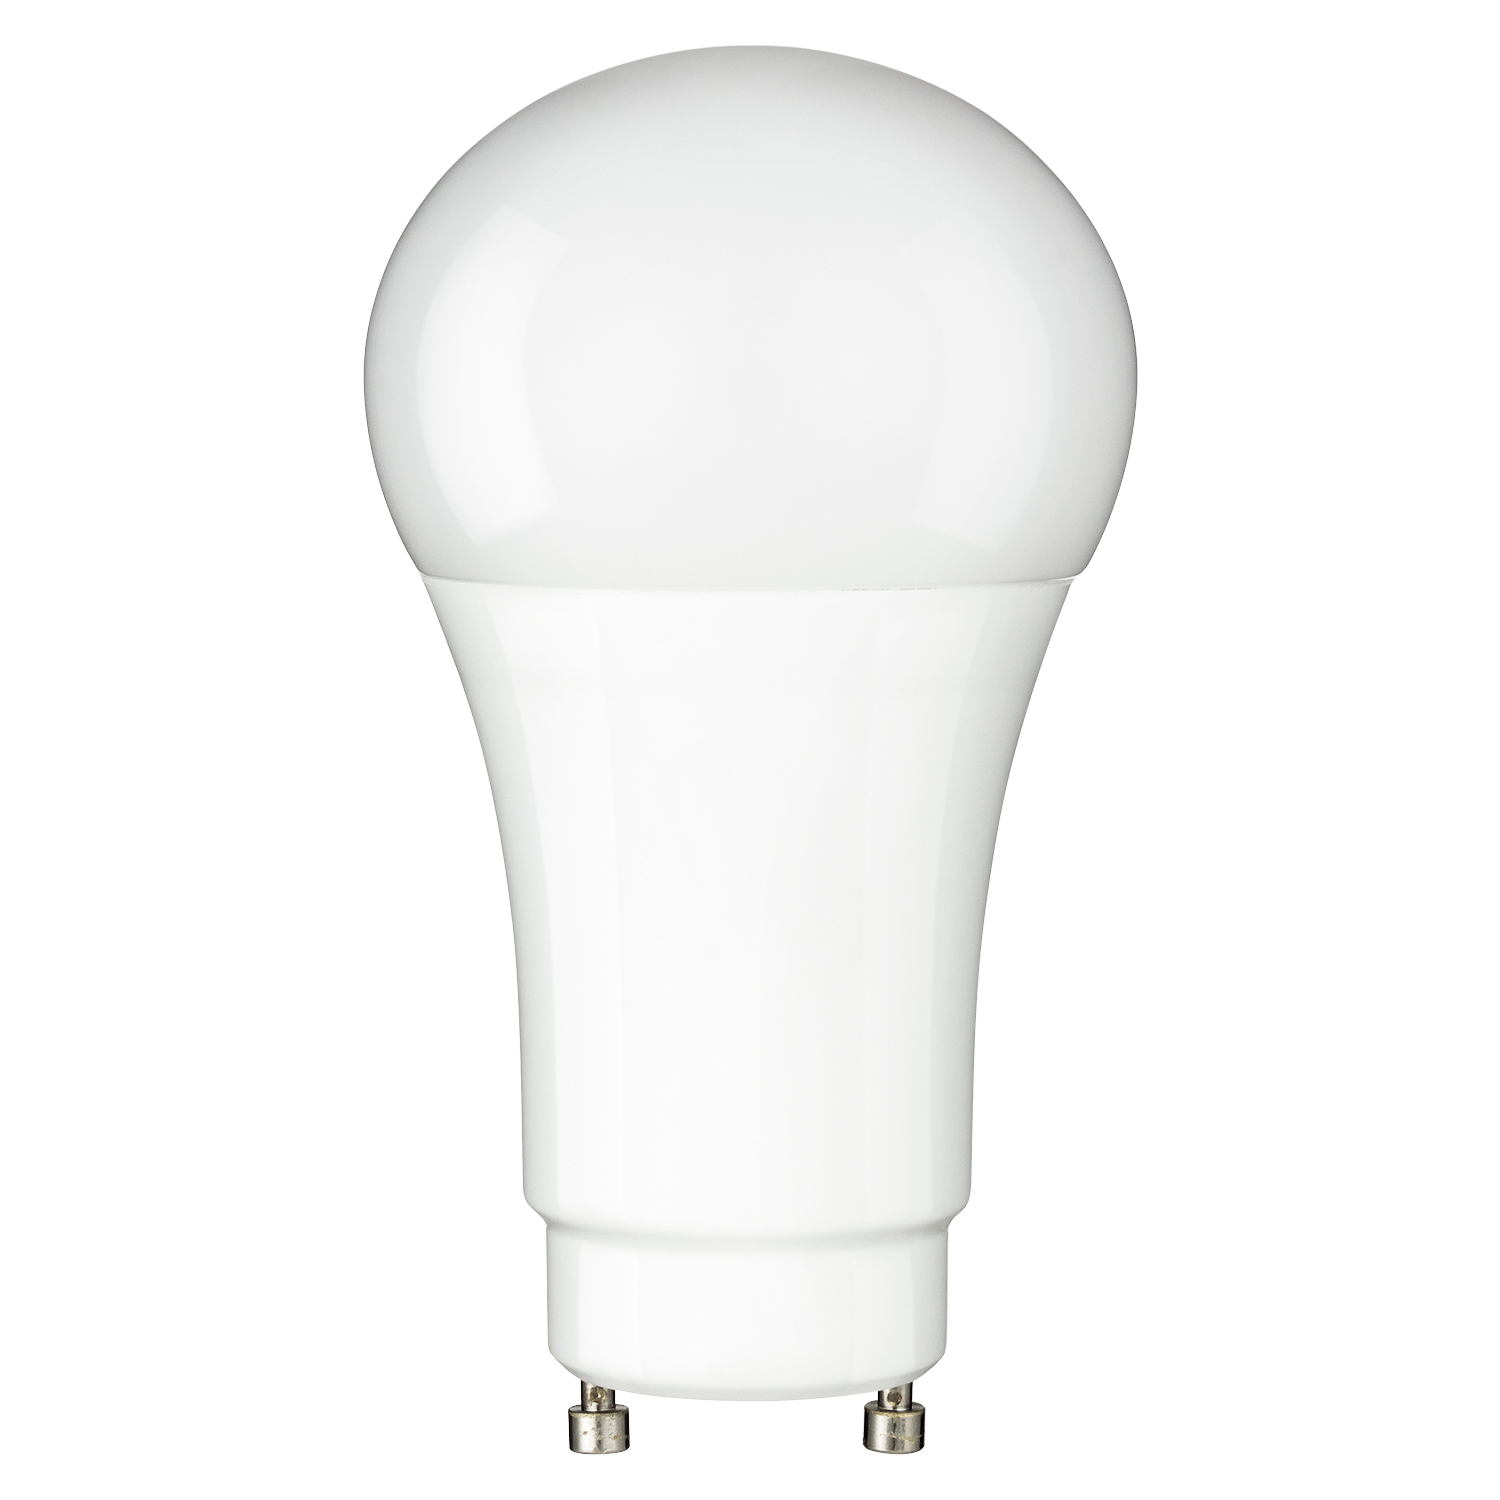 Light Bulb LED GU24 Twist n Lock Base Dimmable UL Listed 2700K - Click Image to Close